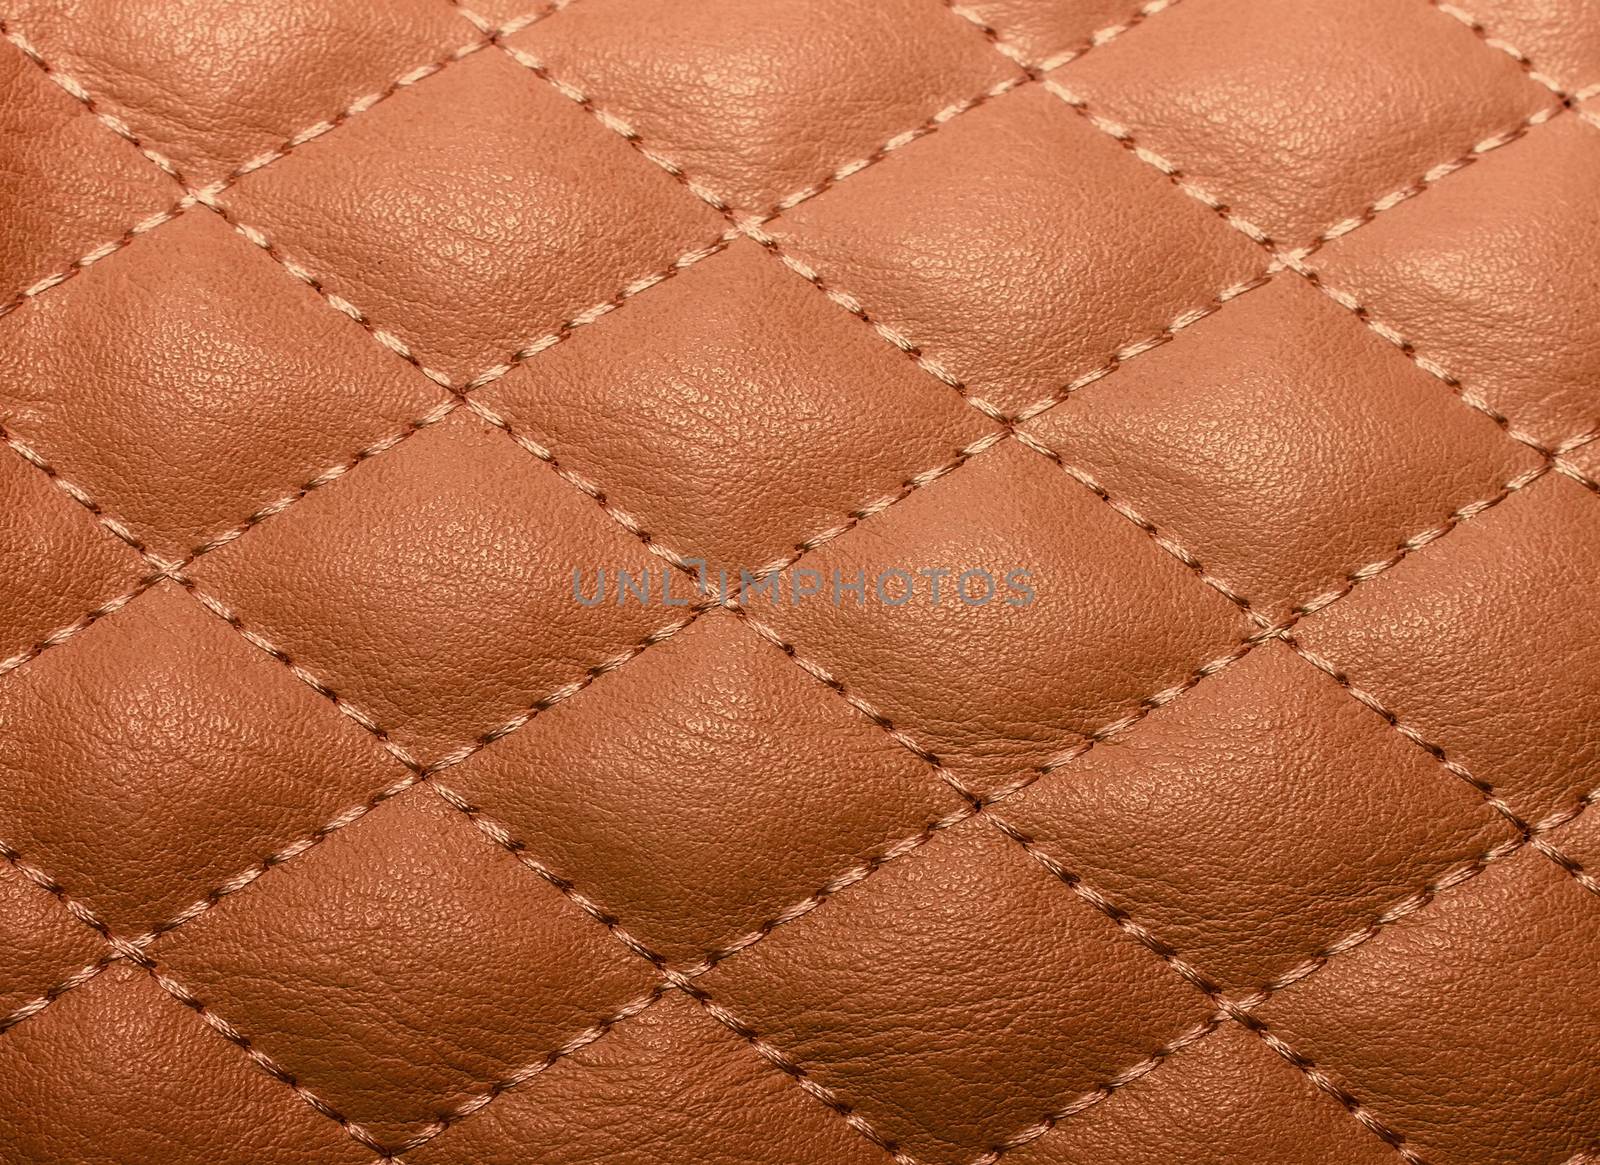 quilted texture artificial leather, stitched with thread for the by KoliadzynskaIryna